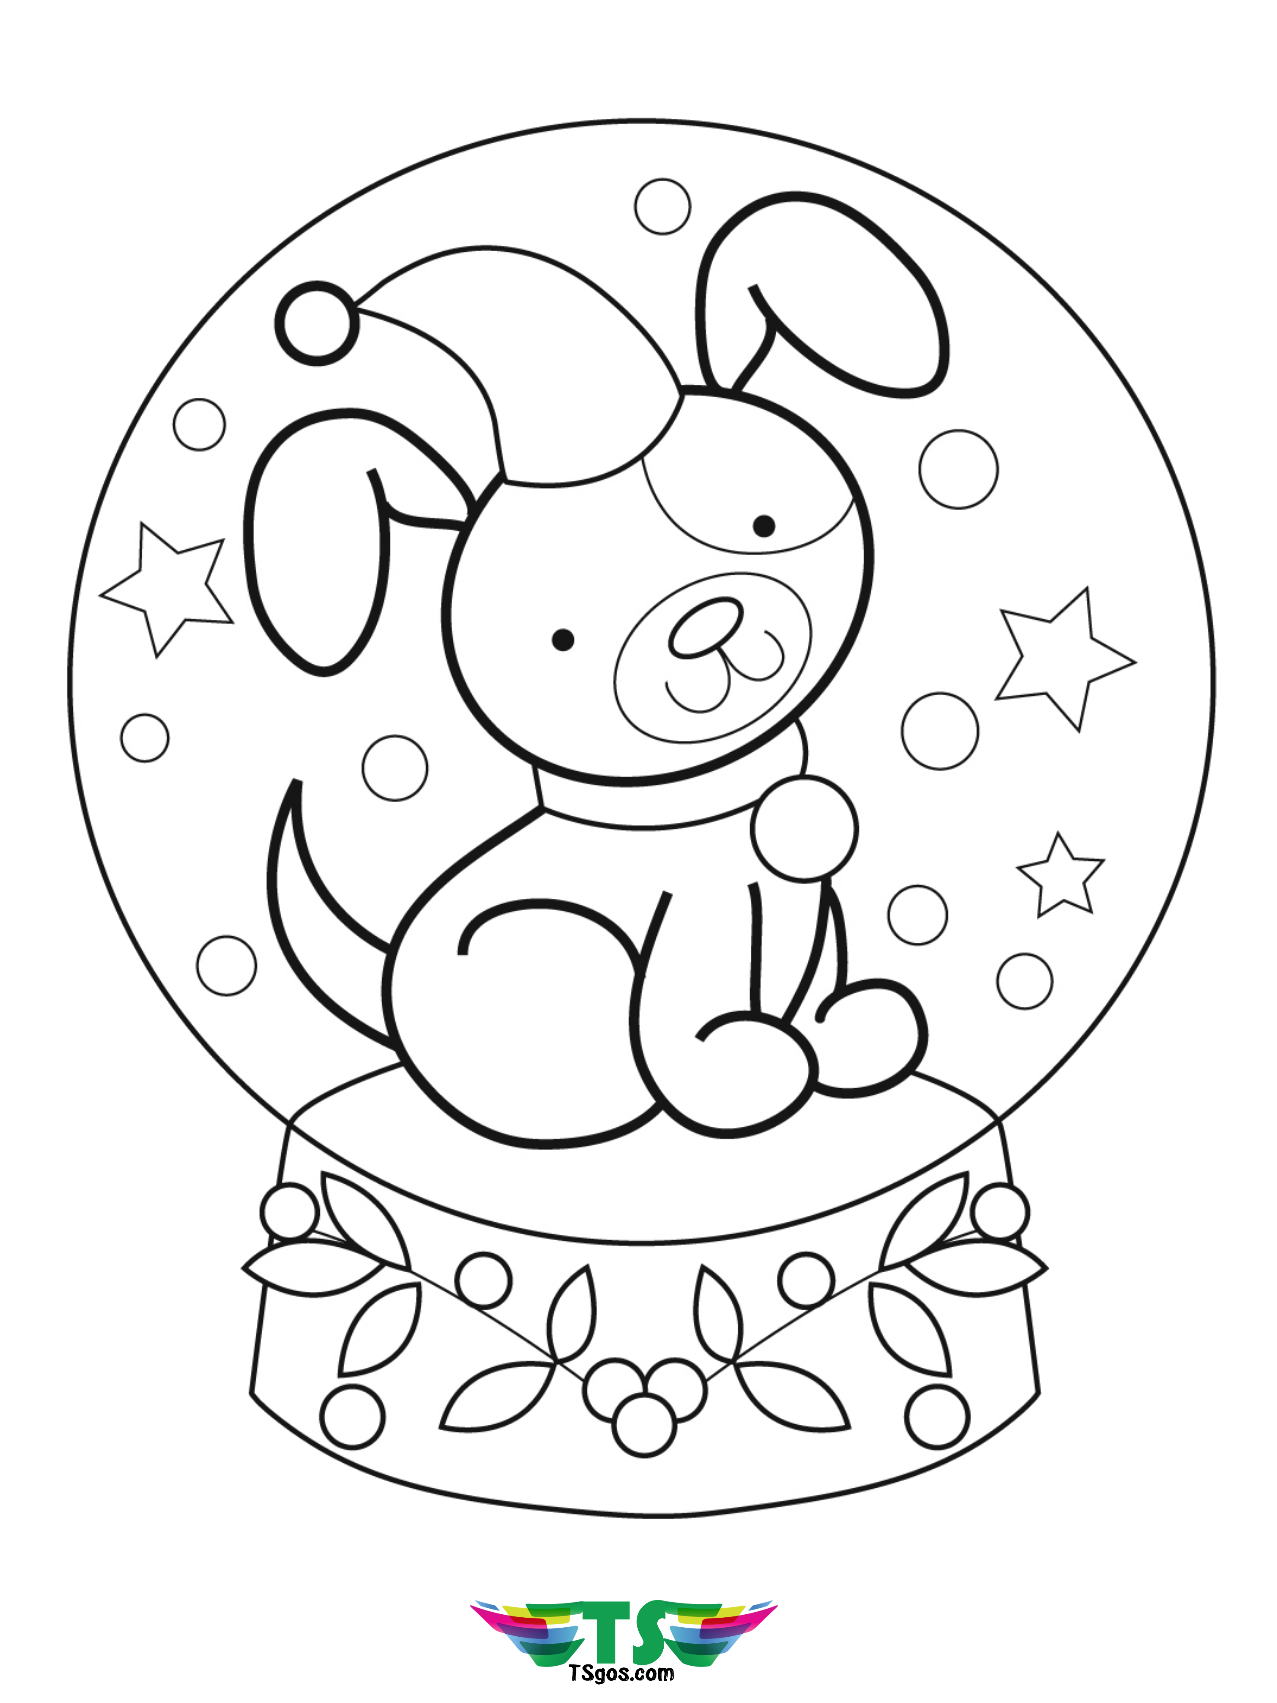 Free and easy dog coloring page for toddlers